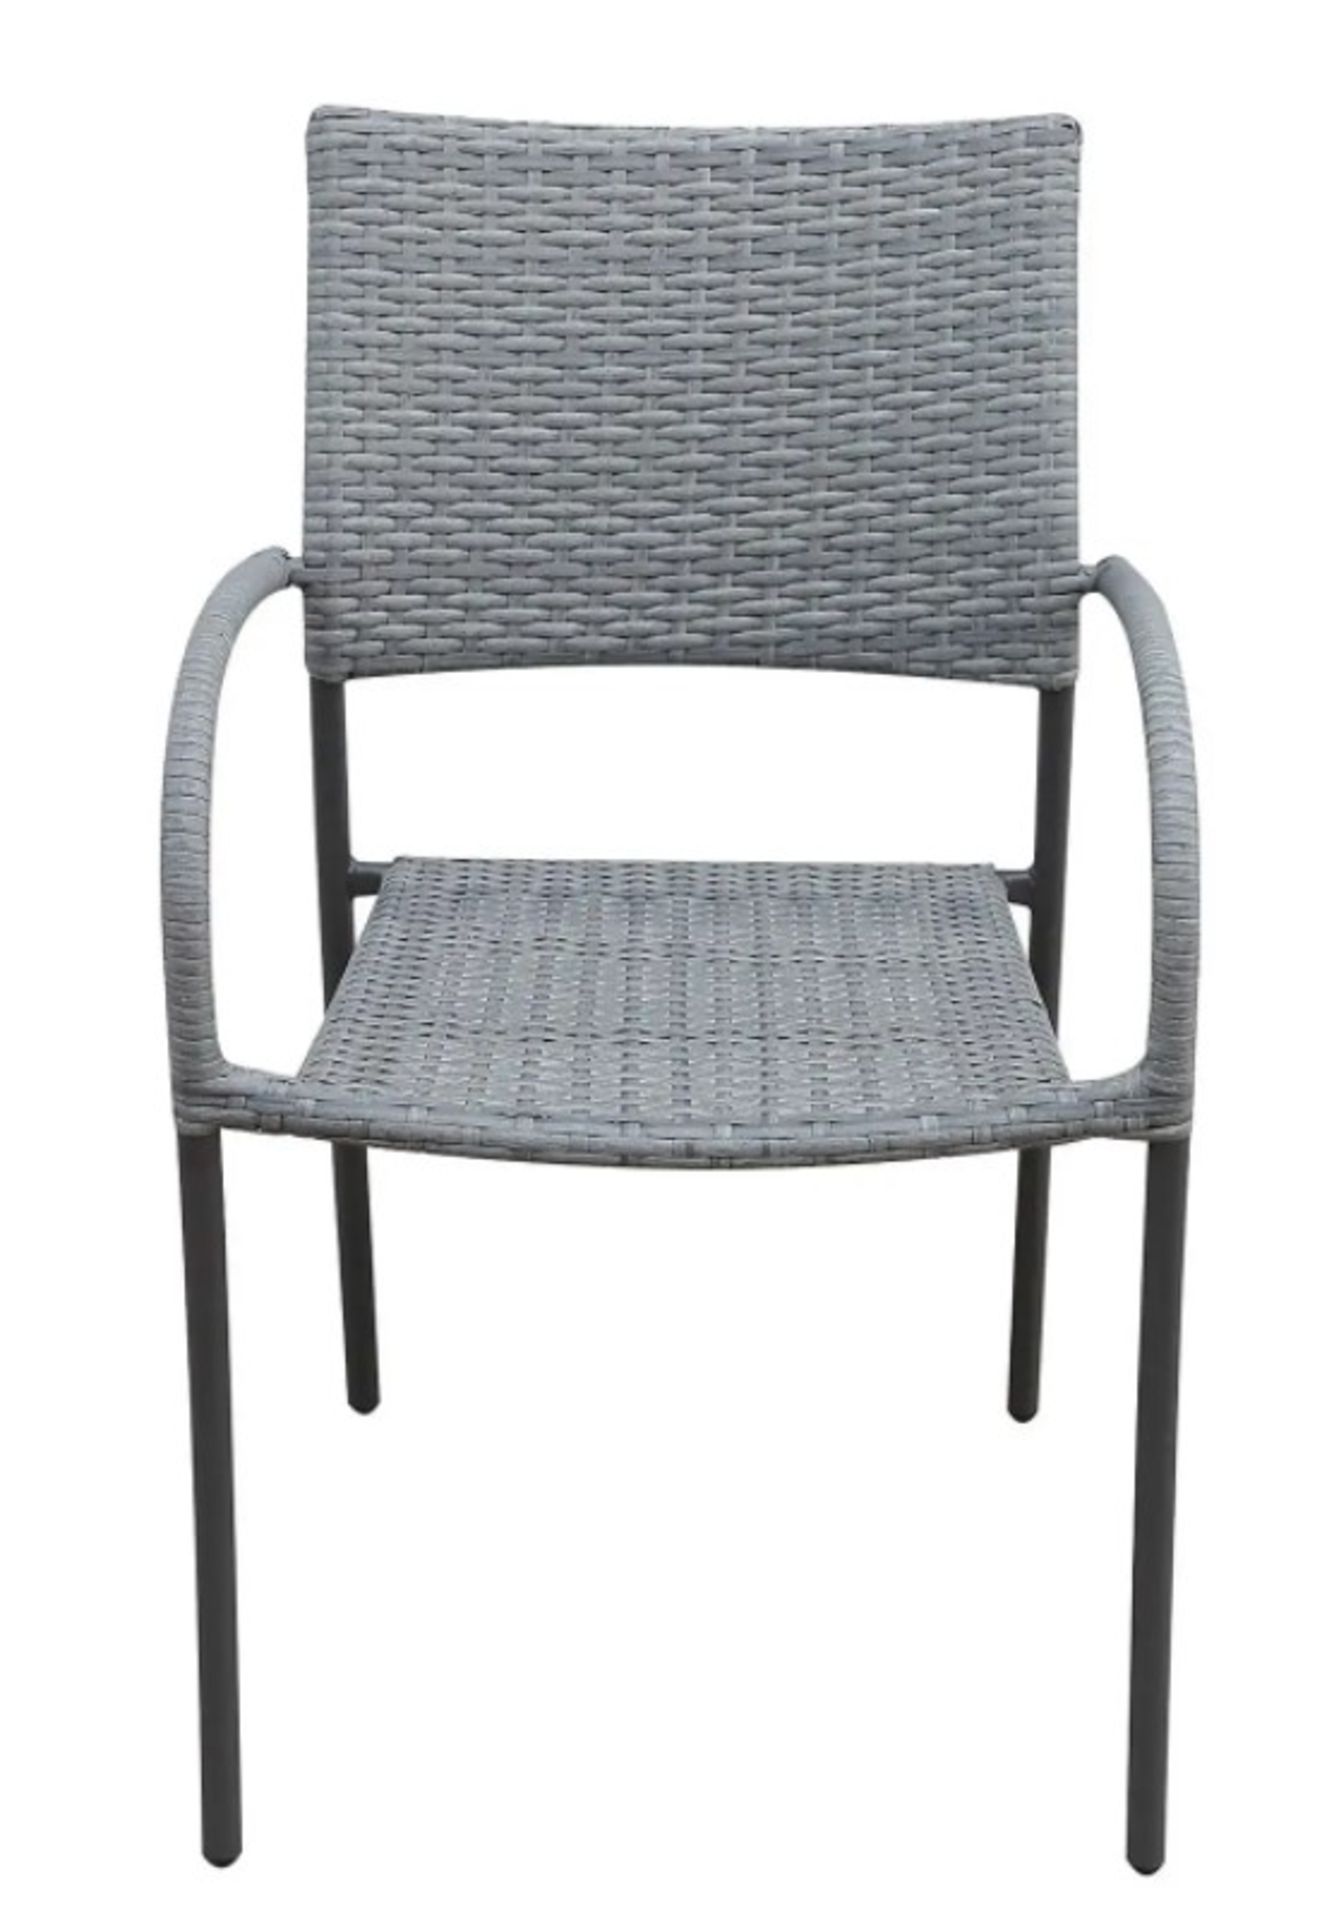 (57/5E) 7x Bambrick Stacking Chair Grey. (All Units Appears As New). - Image 3 of 4